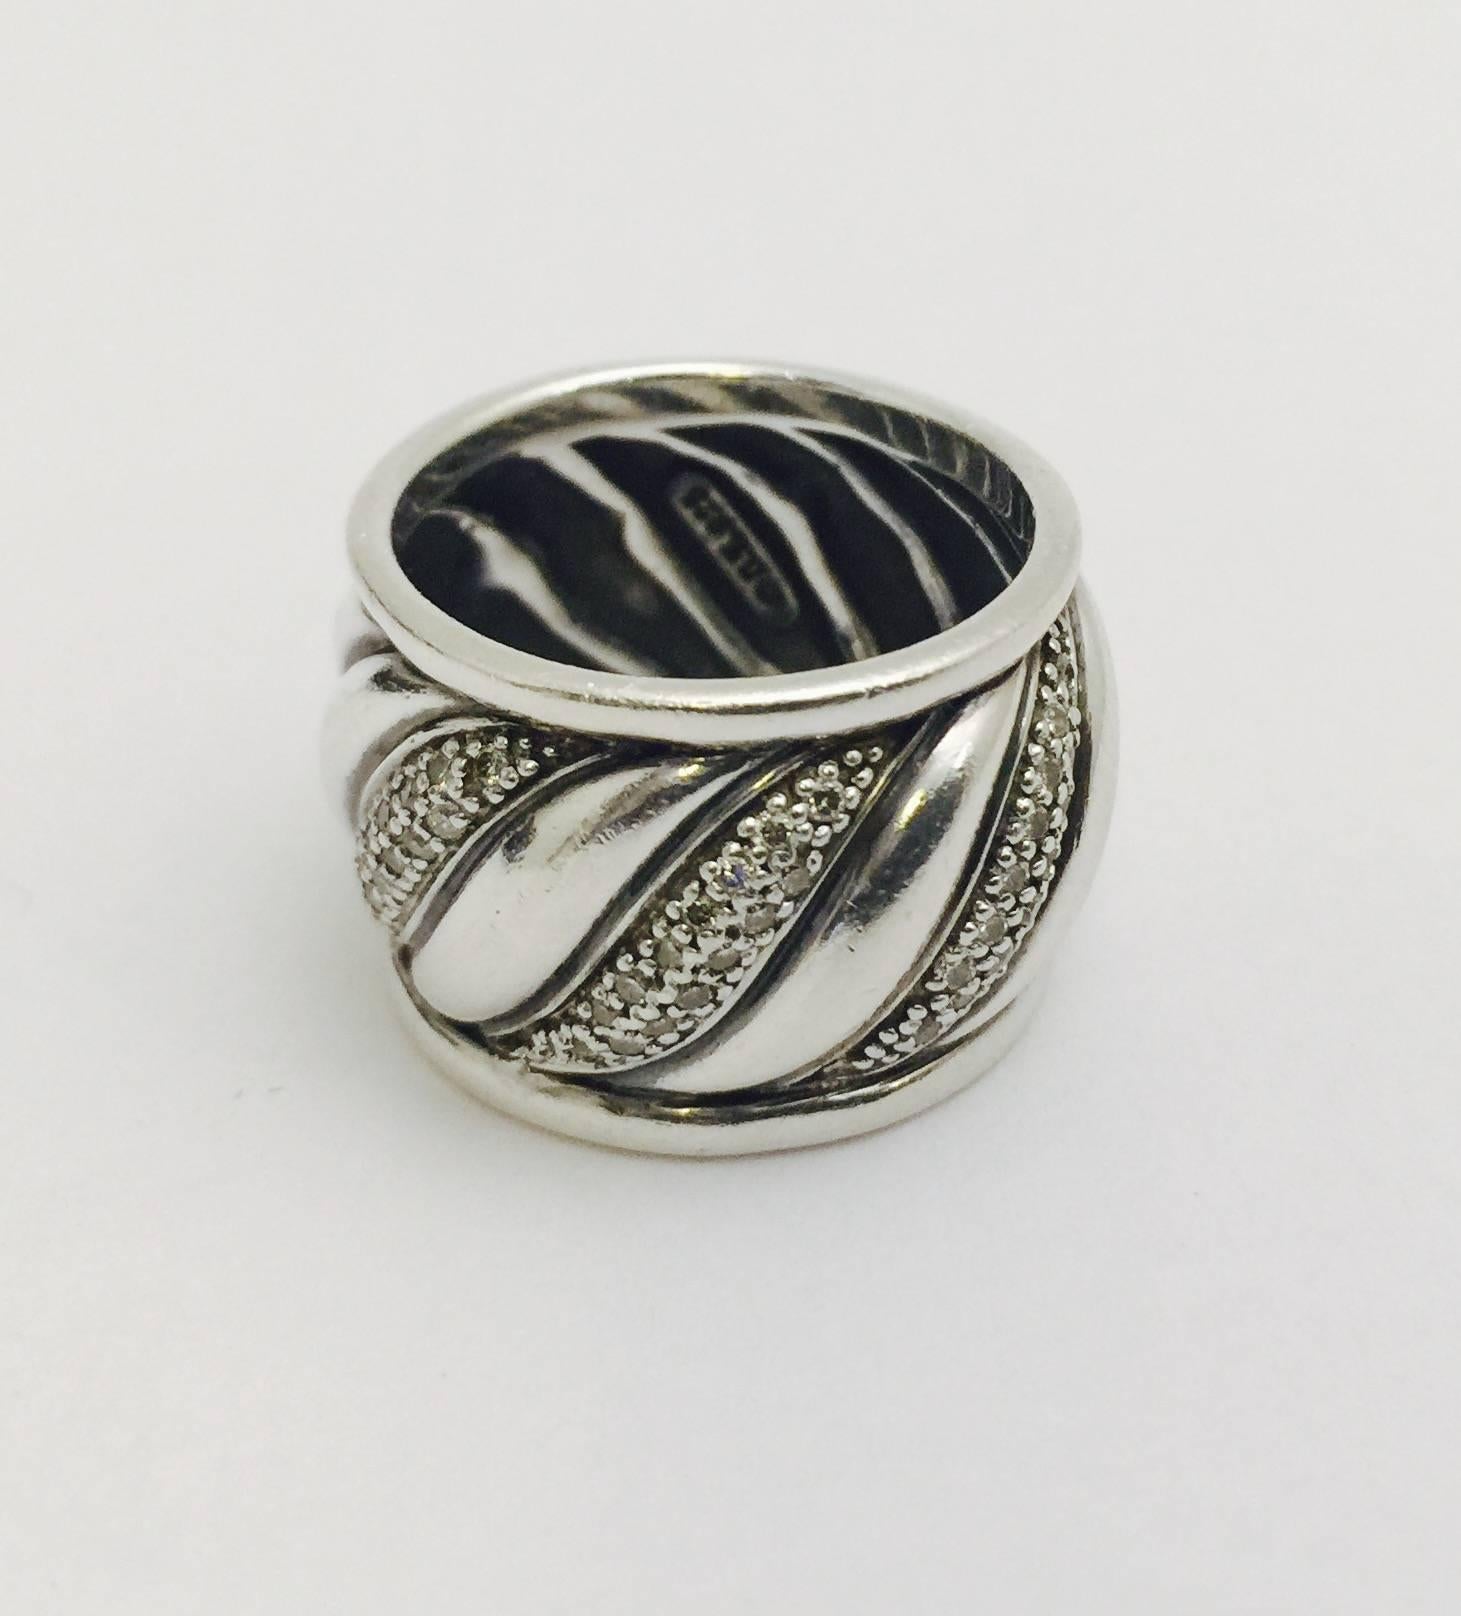 David Yurman set the Fine Jewelry world on fire by being the first designer to incorporate diamonds set in Sterling Silver.  Great idea!  This classic band style ring with graceful curves exemplifies elegance in simplicity.  Three sections contain